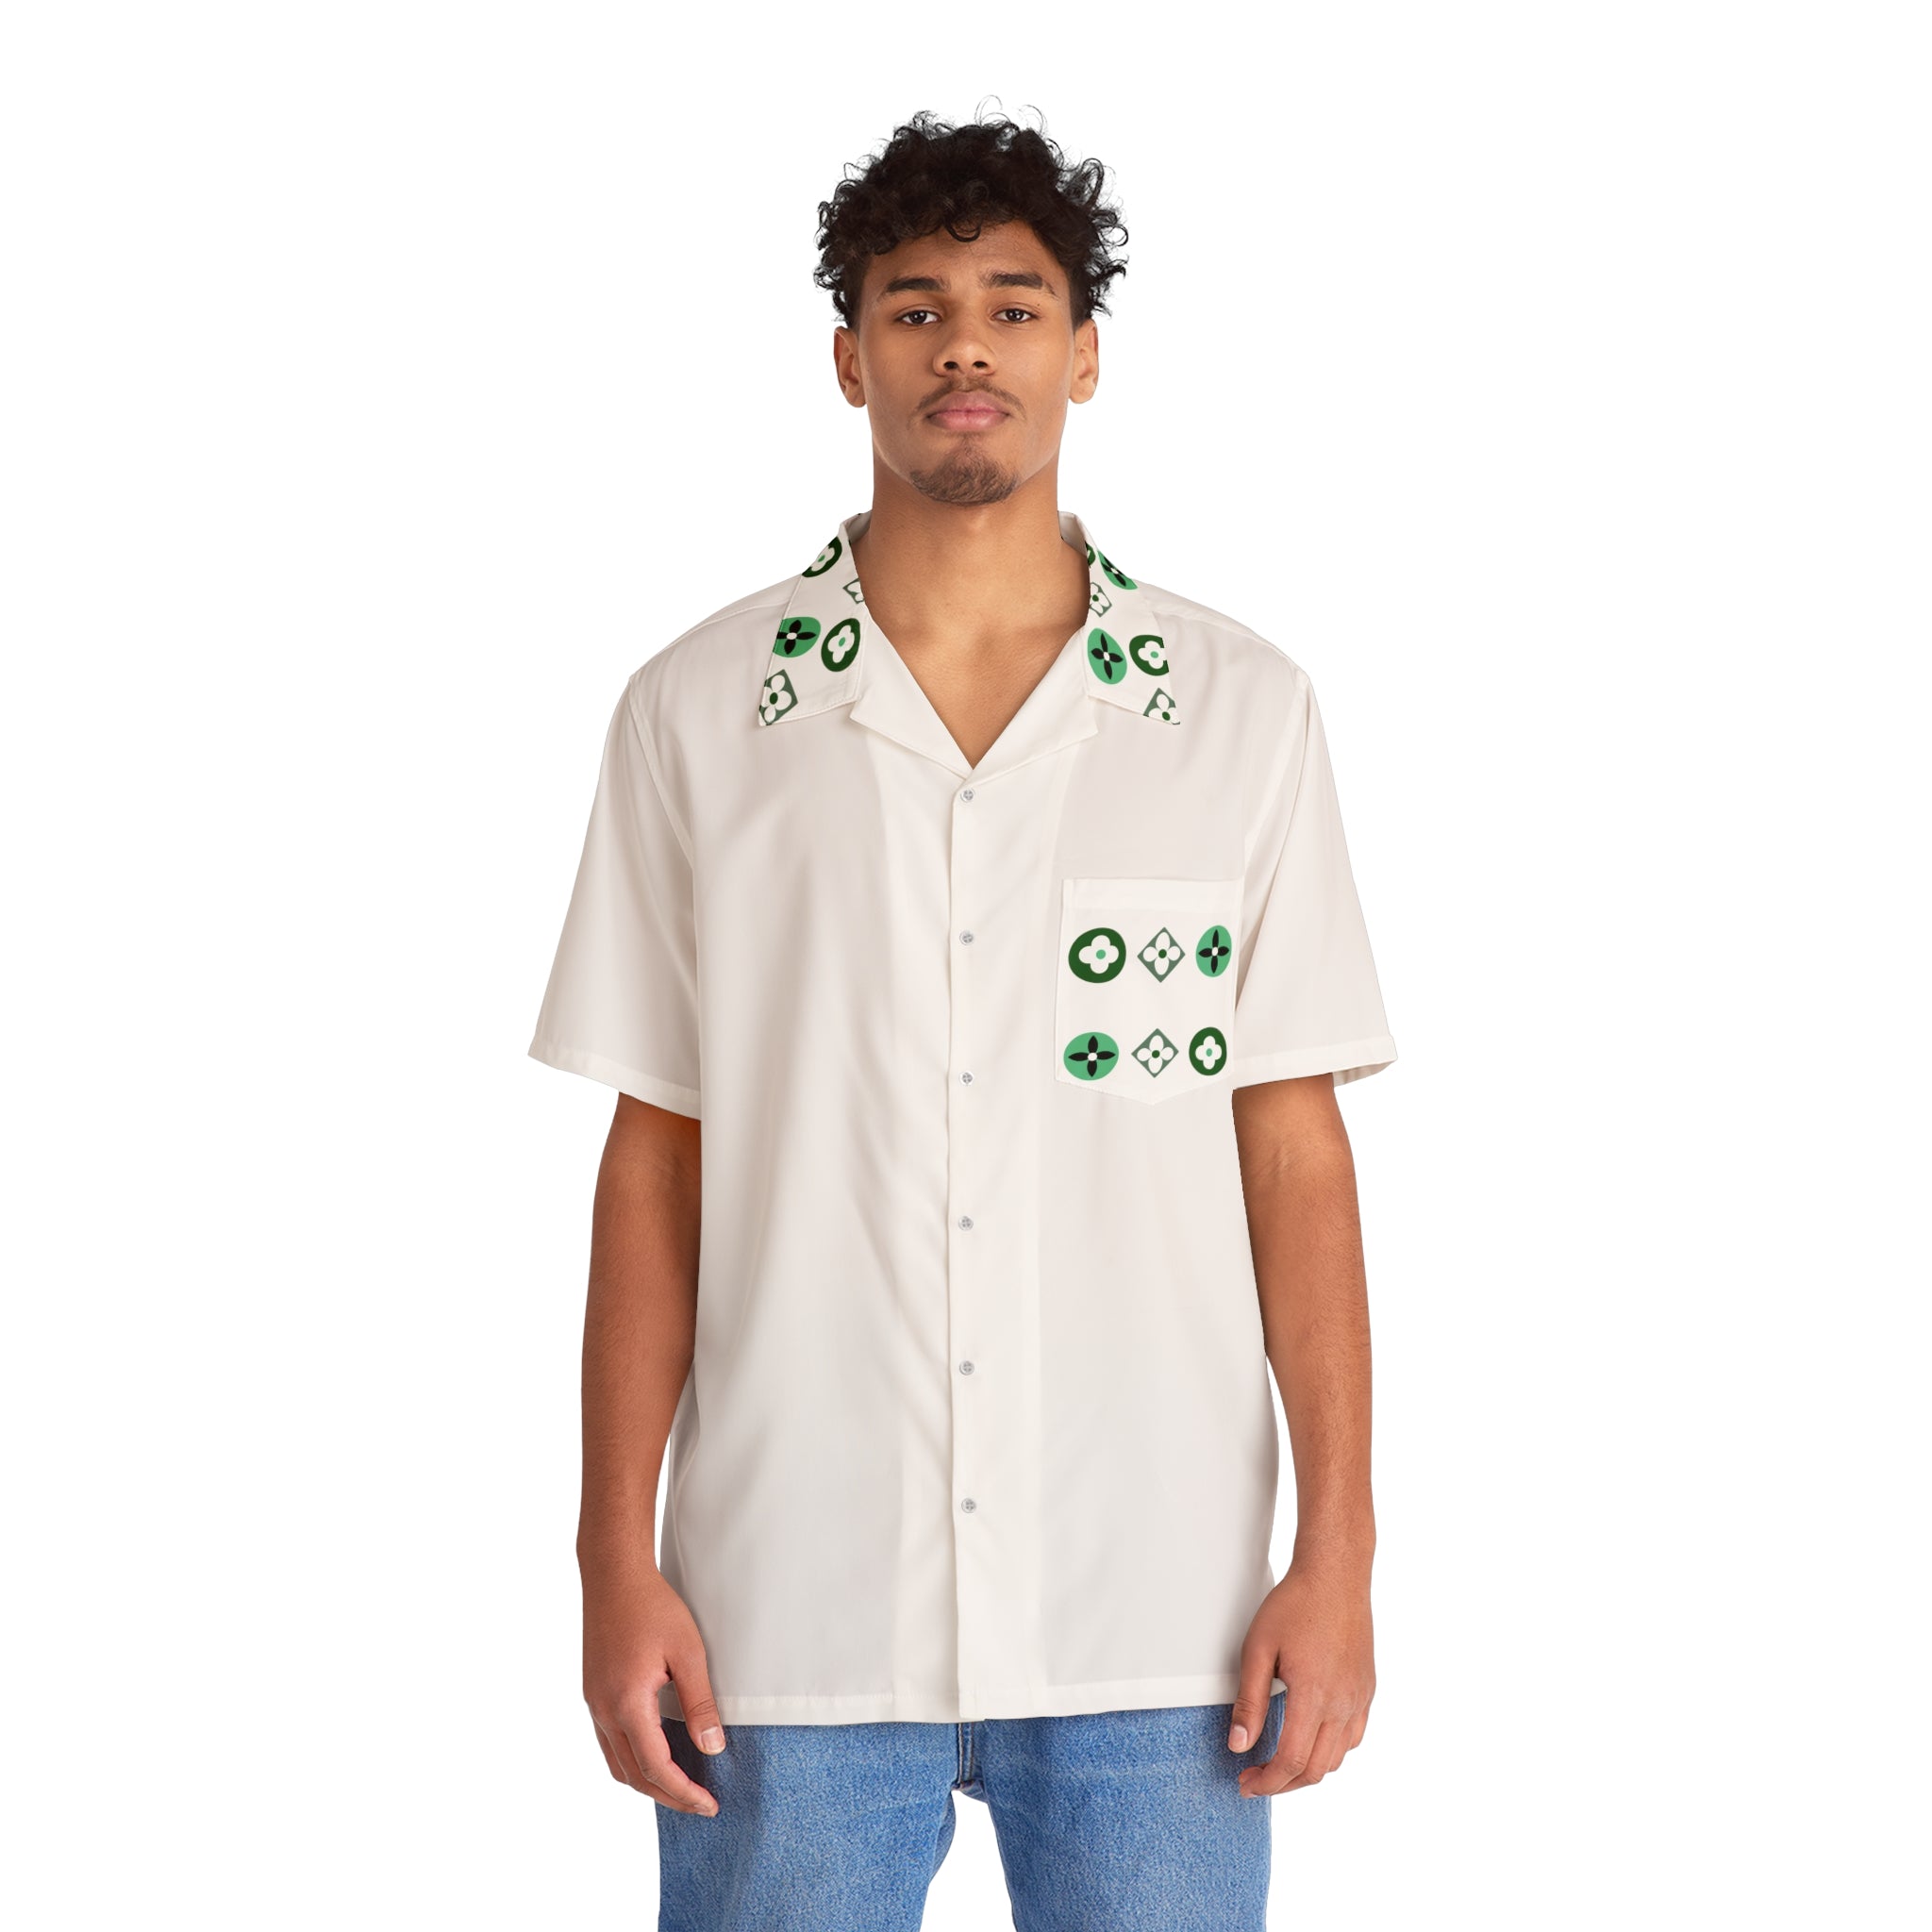 Groove Collection Trilogy of Icons Pocket Grid (Greens) White Unisex Gender Neutral Button Up Shirt, Hawaiian Shirt